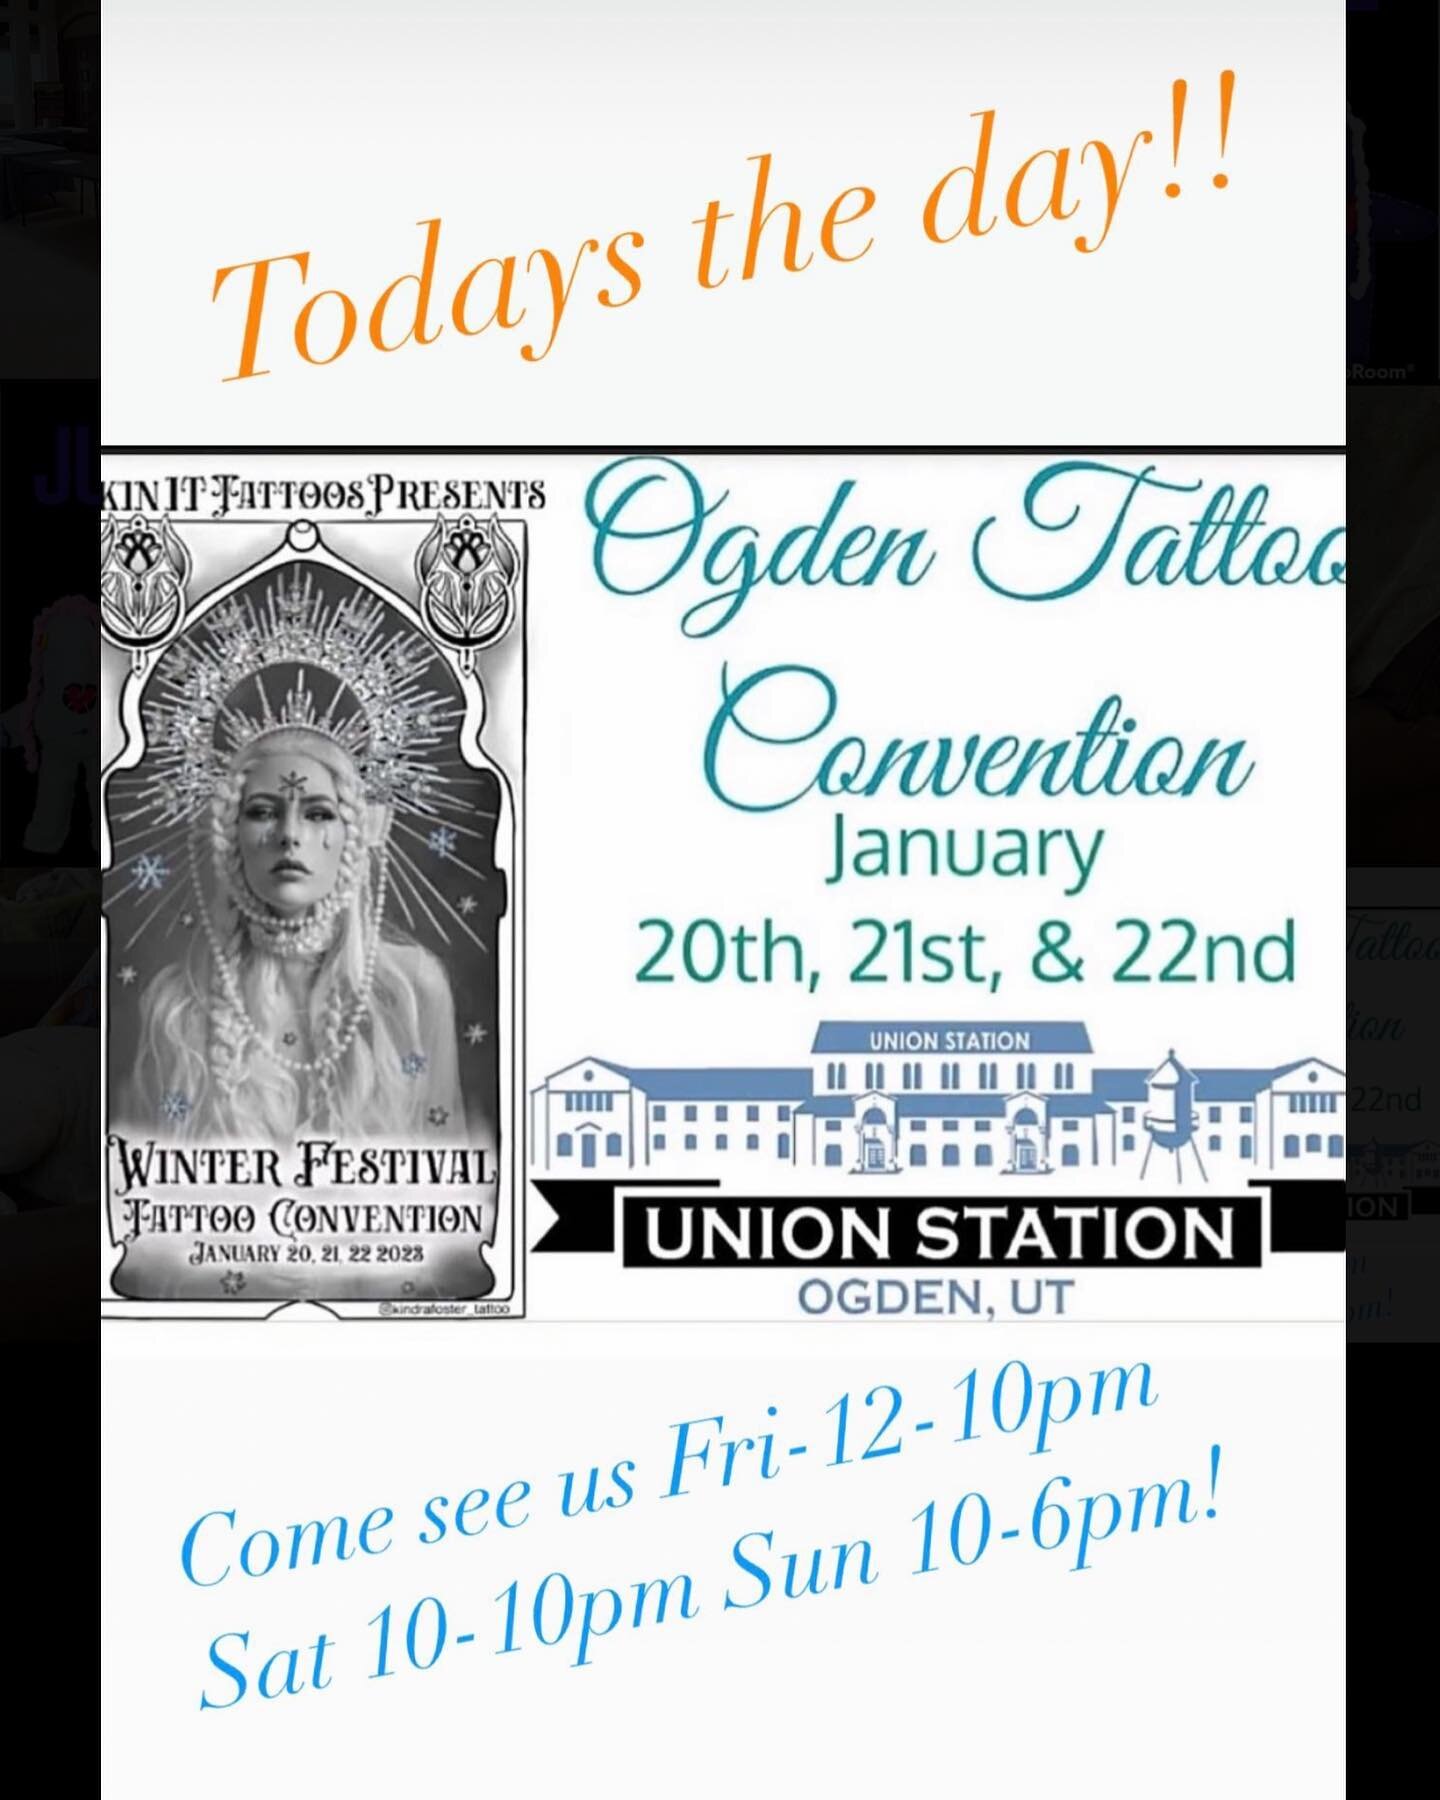 Todays the day!! We are back at the @ogdentattooconvention hosted by @jackart13!! We will be at Ogden Union Station Fri 12-10pm, Sat 10-10pm and Sunday 10-6pm! Come check out the the Artists, Vendors, food trucks and music! Bring the whole family for